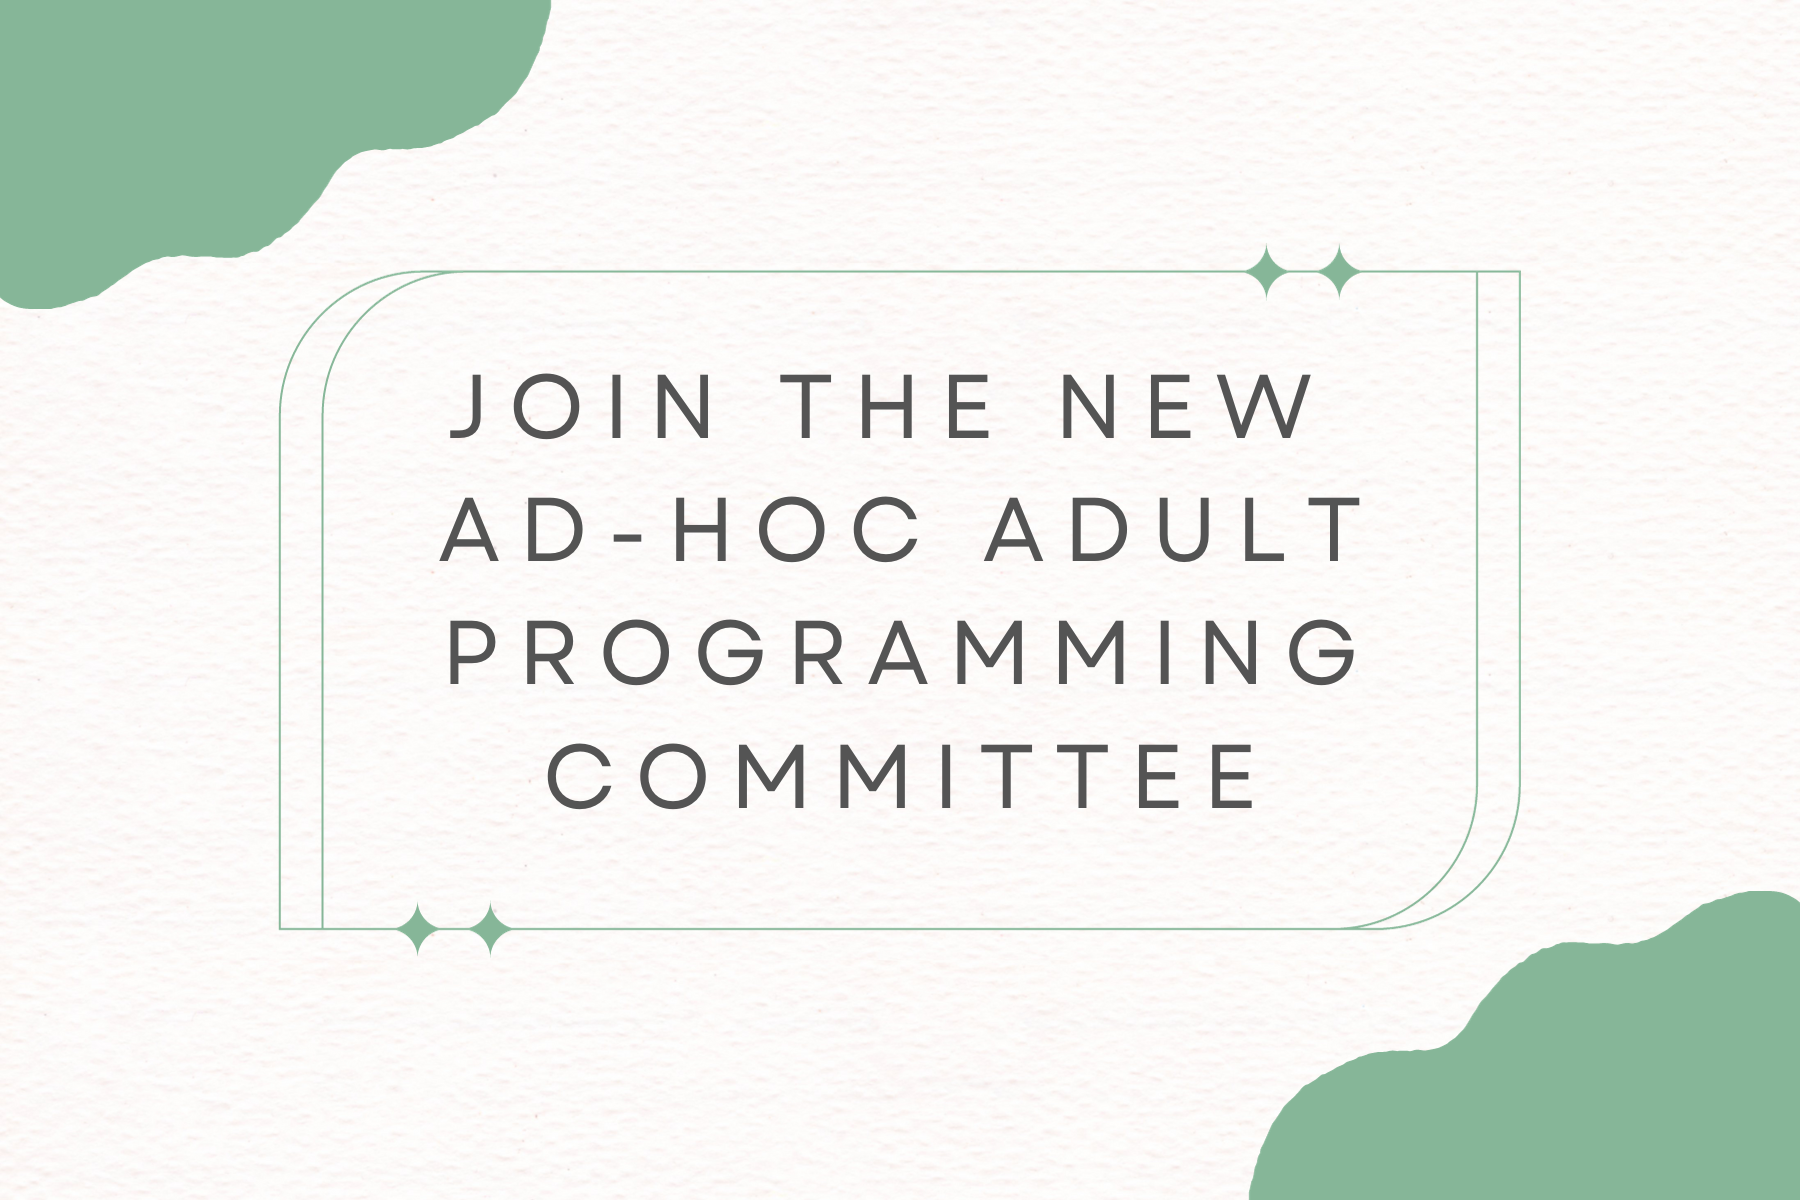 Join the new ad-hoc Adult Programming Committee